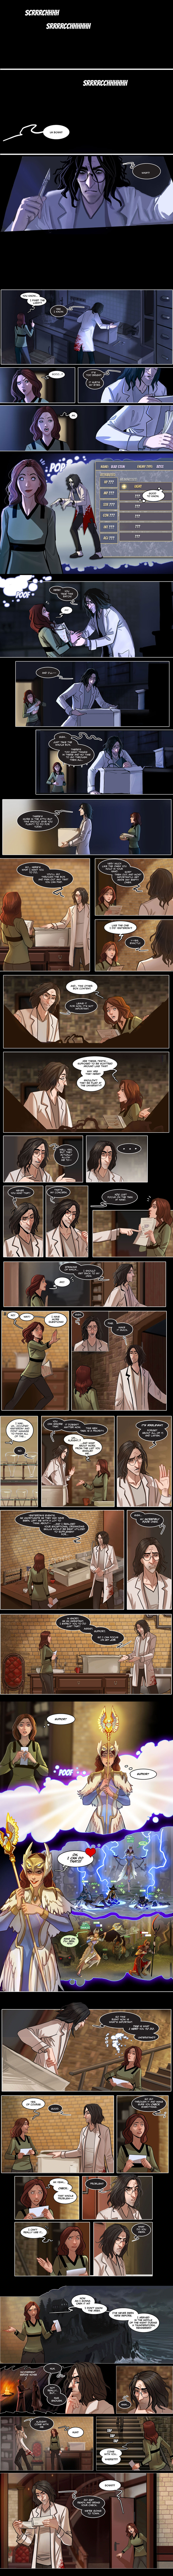 Blood Stain ch. 4 (ongoing) [Linda Sejic / Sigeel] 5